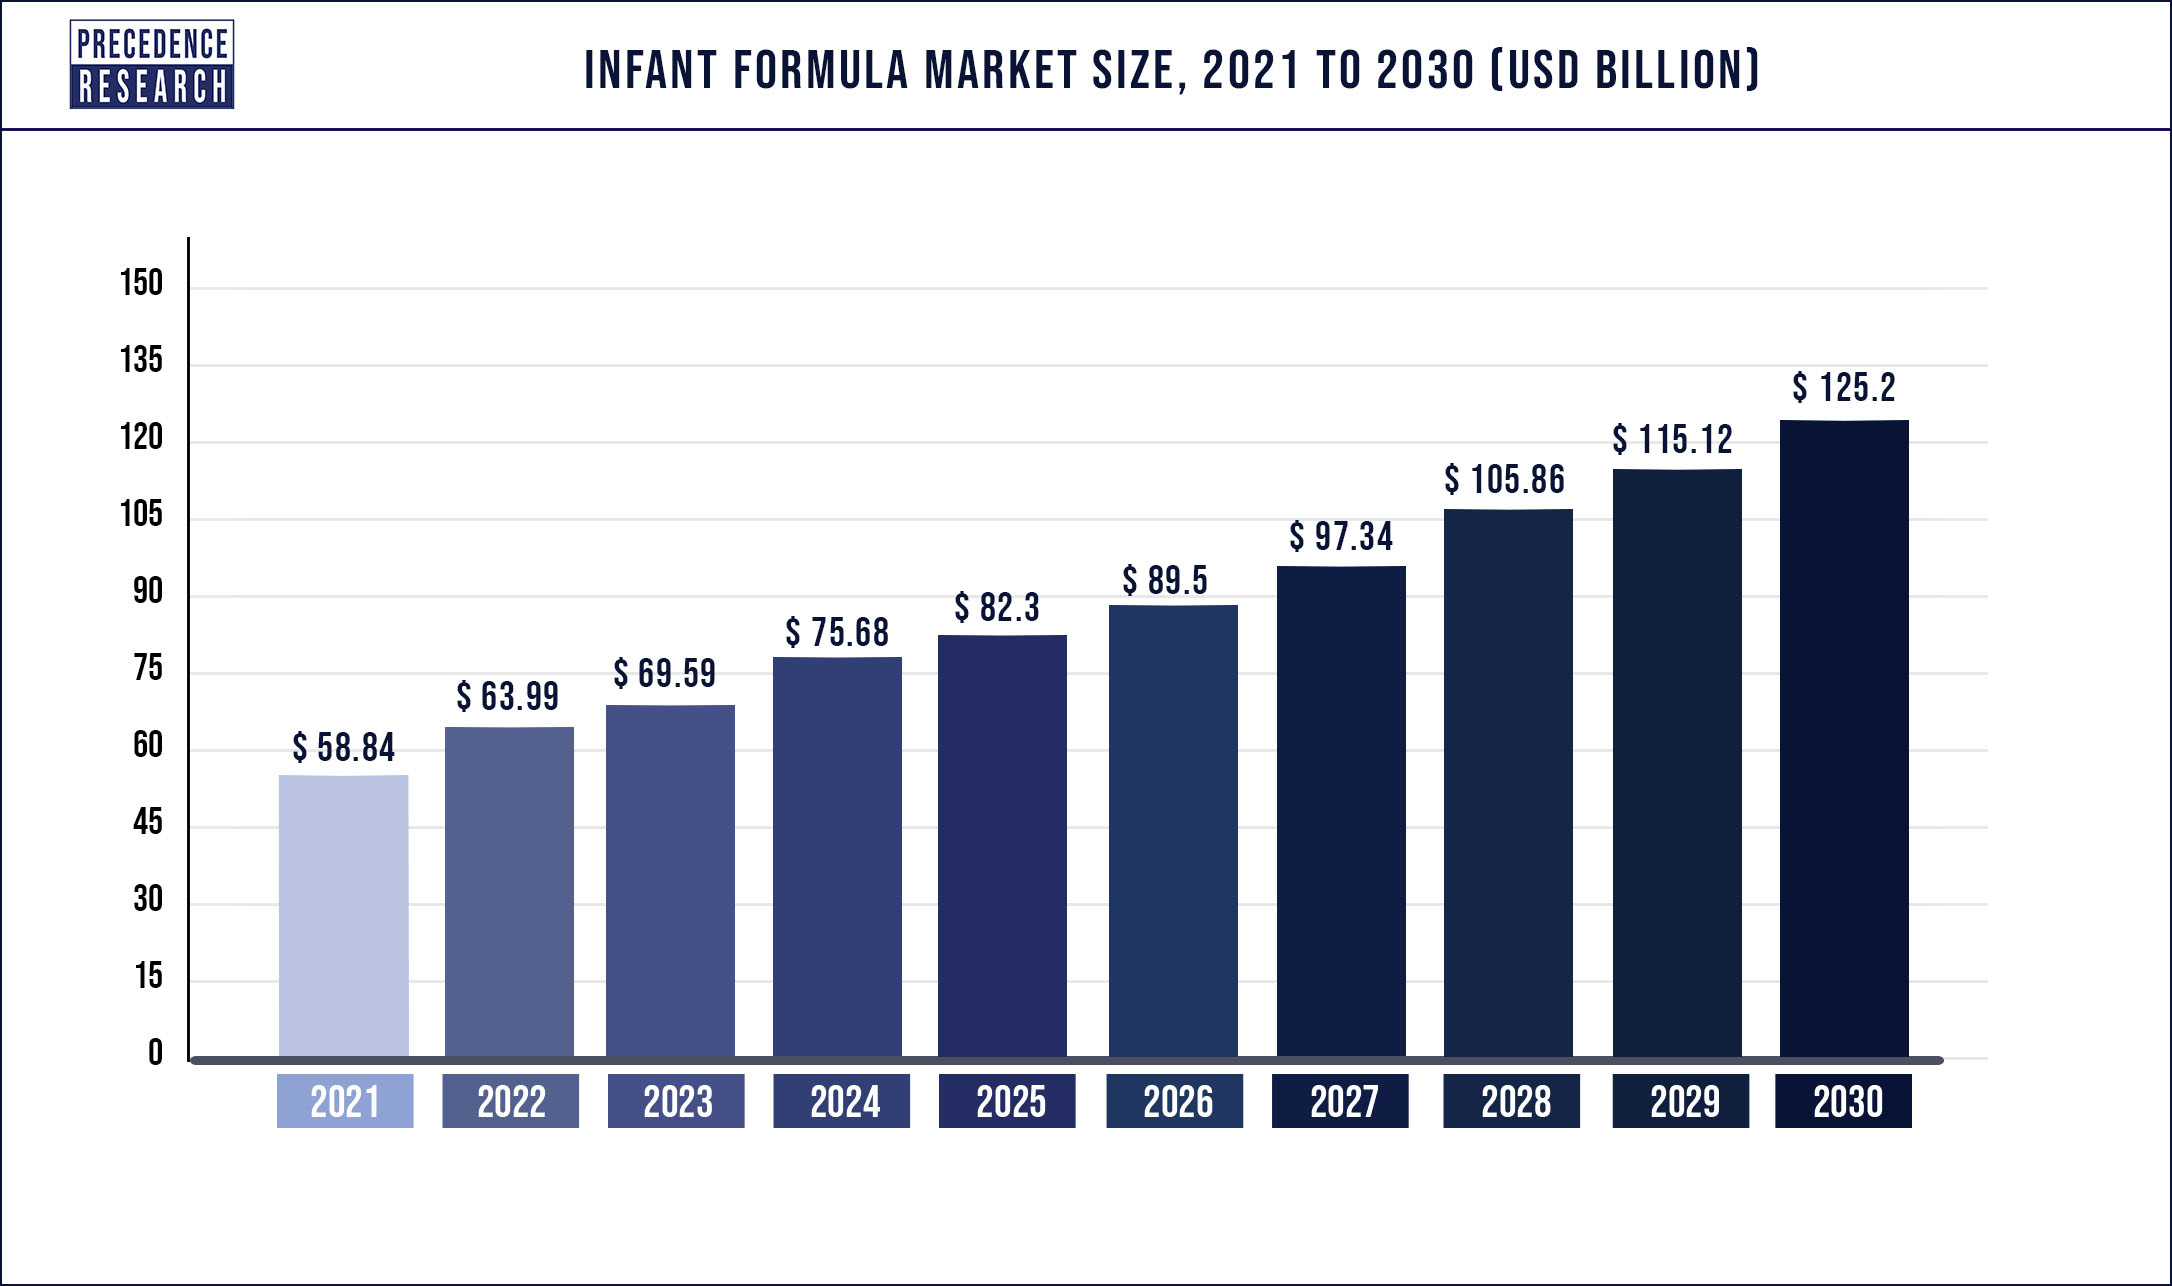 Infant Formula Market Size is Forecasted to Reach US$ 125.2 Billion by 2030